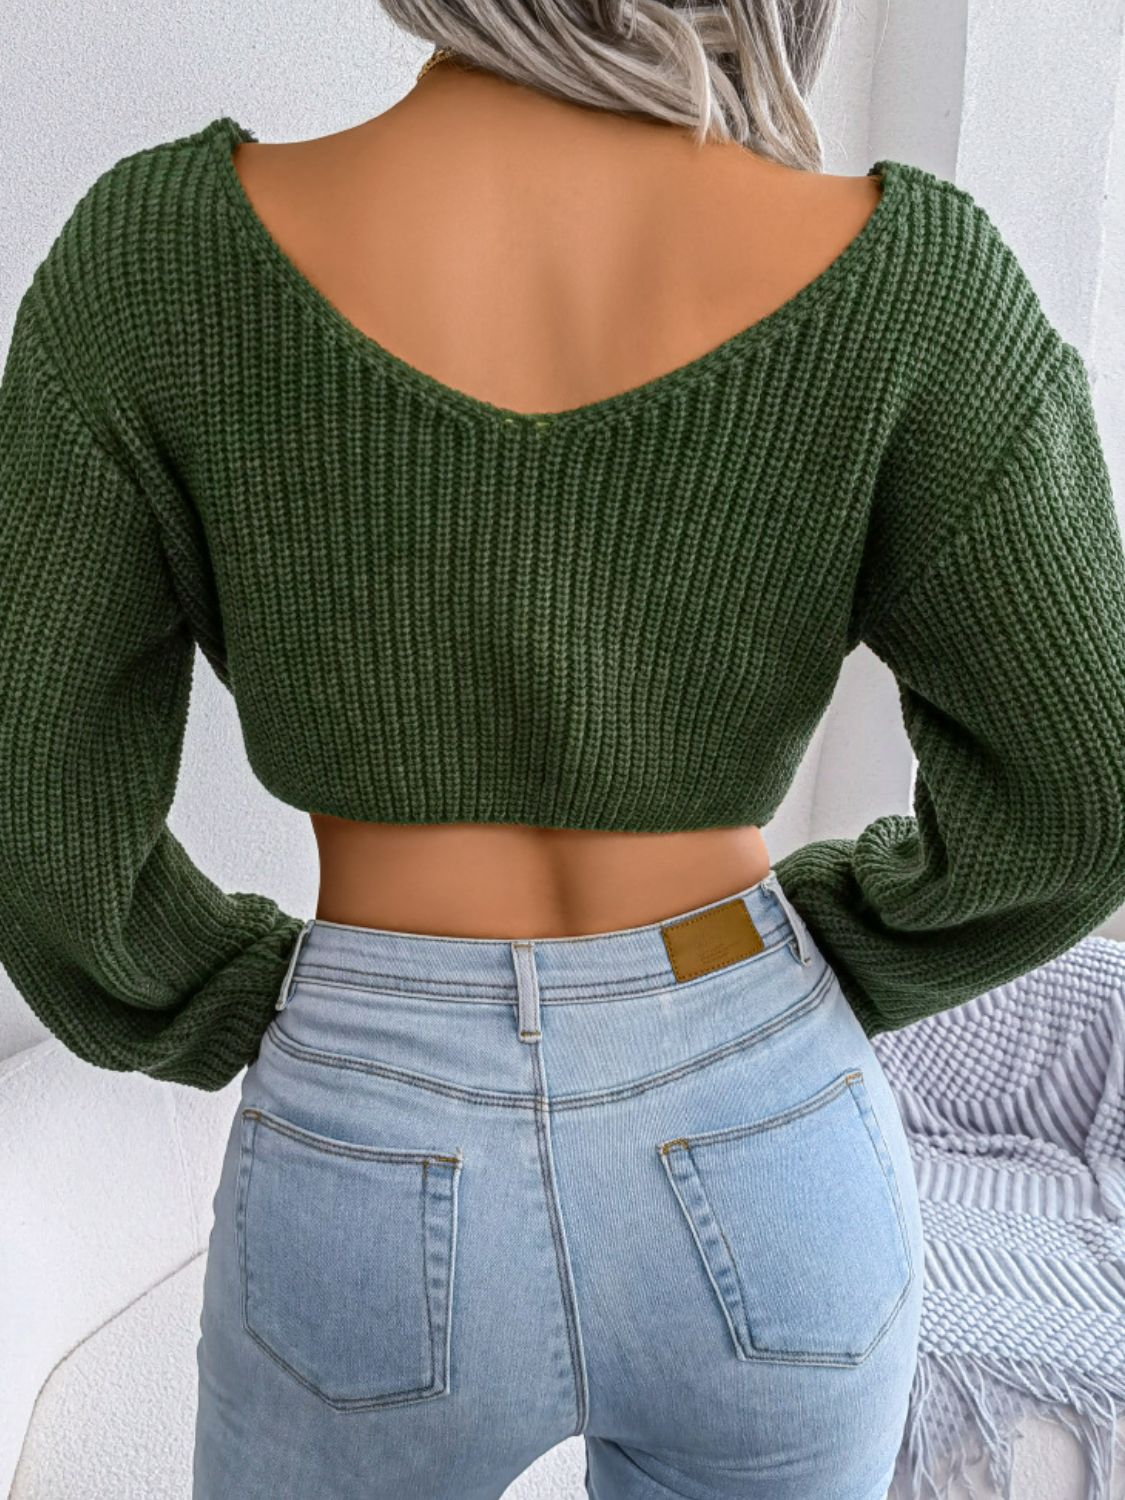 Twisted Front Long Sleeve Cropped Sweater - Fashion Girl Online Store